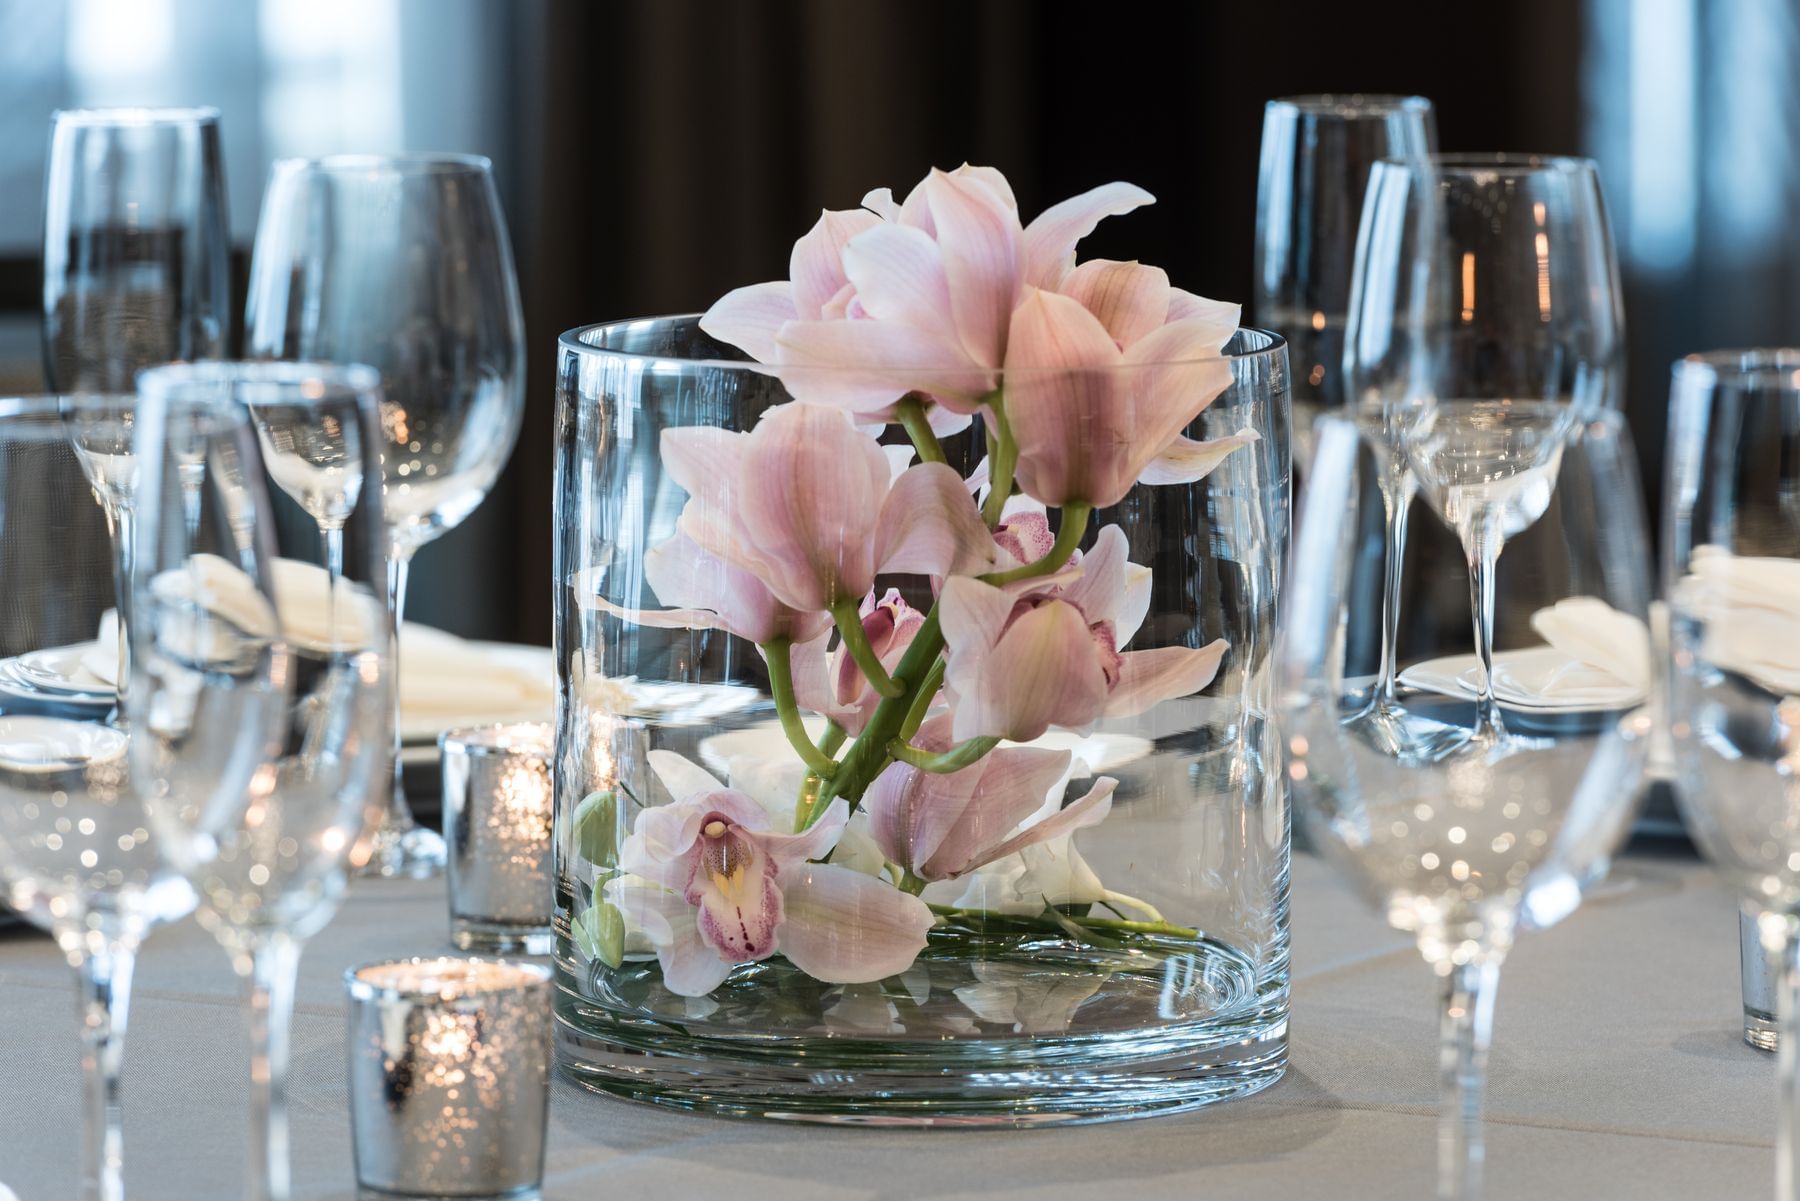 Floral centerpiece and wine glasses